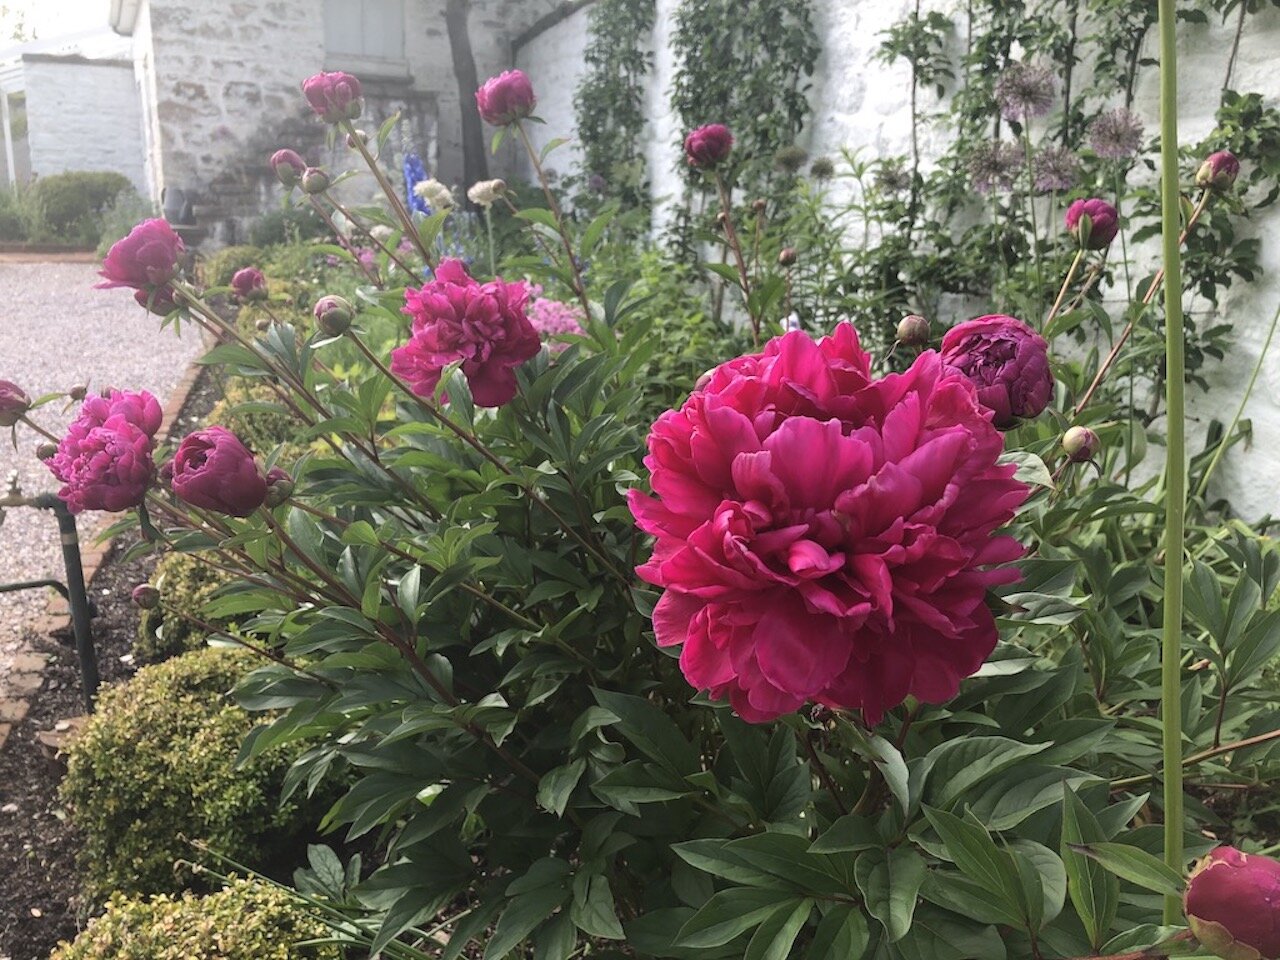  Peonies highlight the formal garden at Oak Spring in late spring. Fragrant fuchsia blooms cover this large double herbaceous peony at the back gate of the garden.   